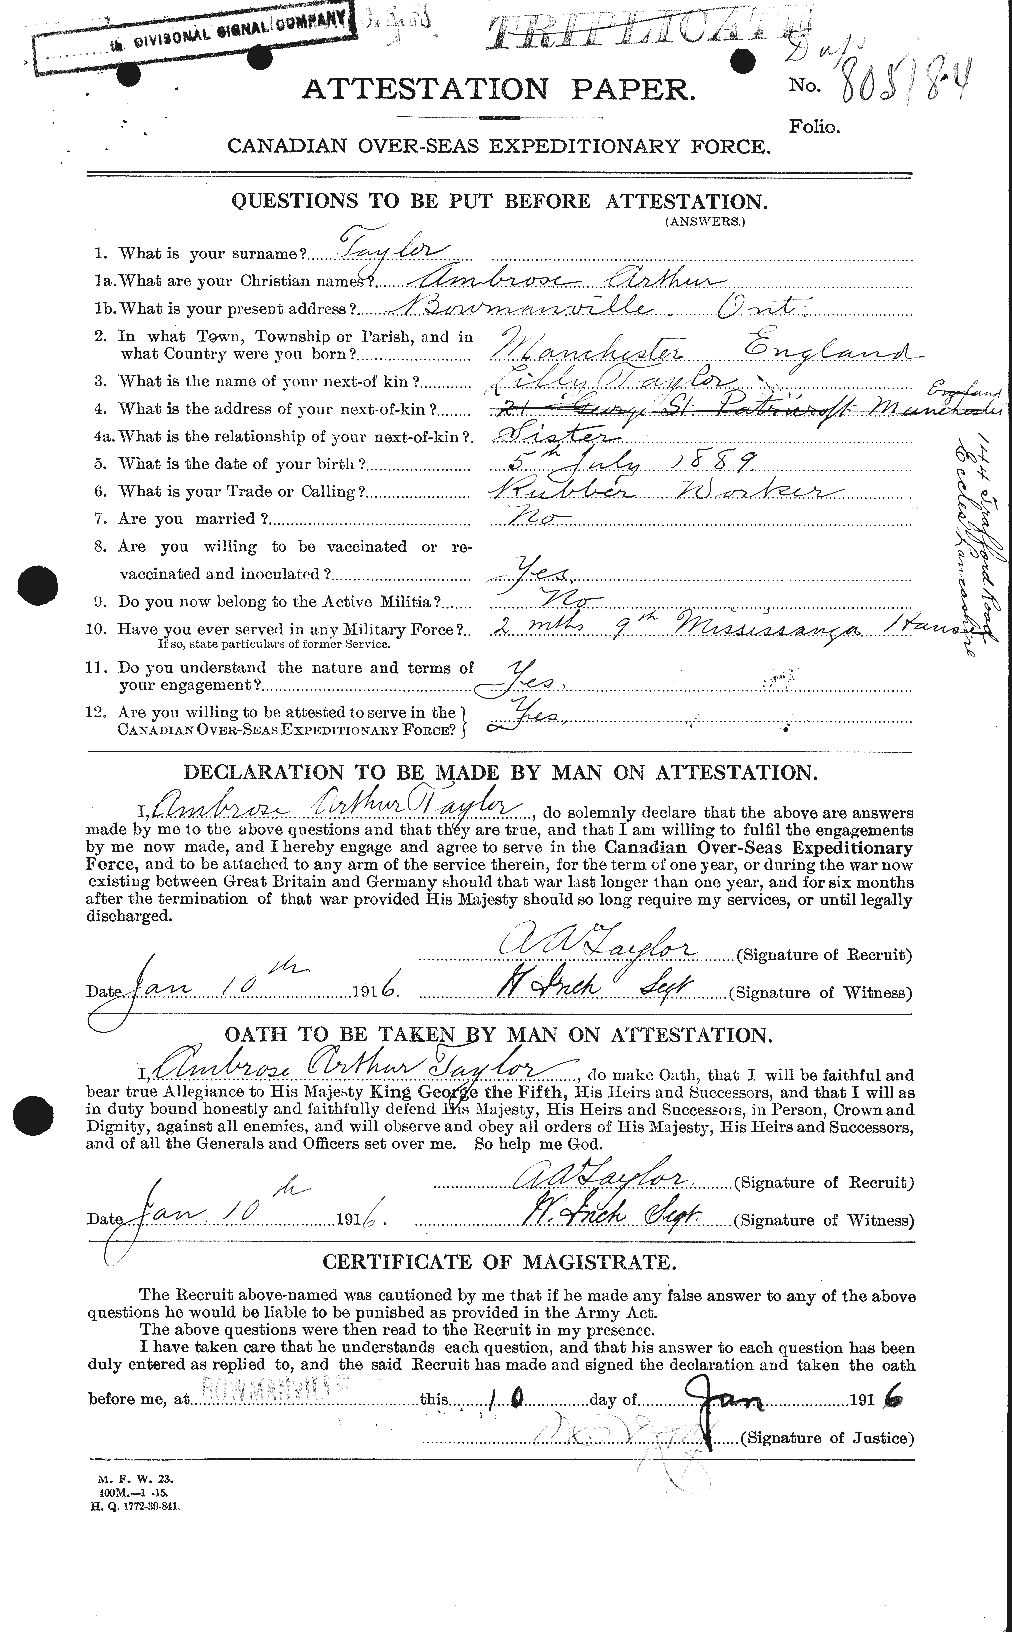 Personnel Records of the First World War - CEF 626217a